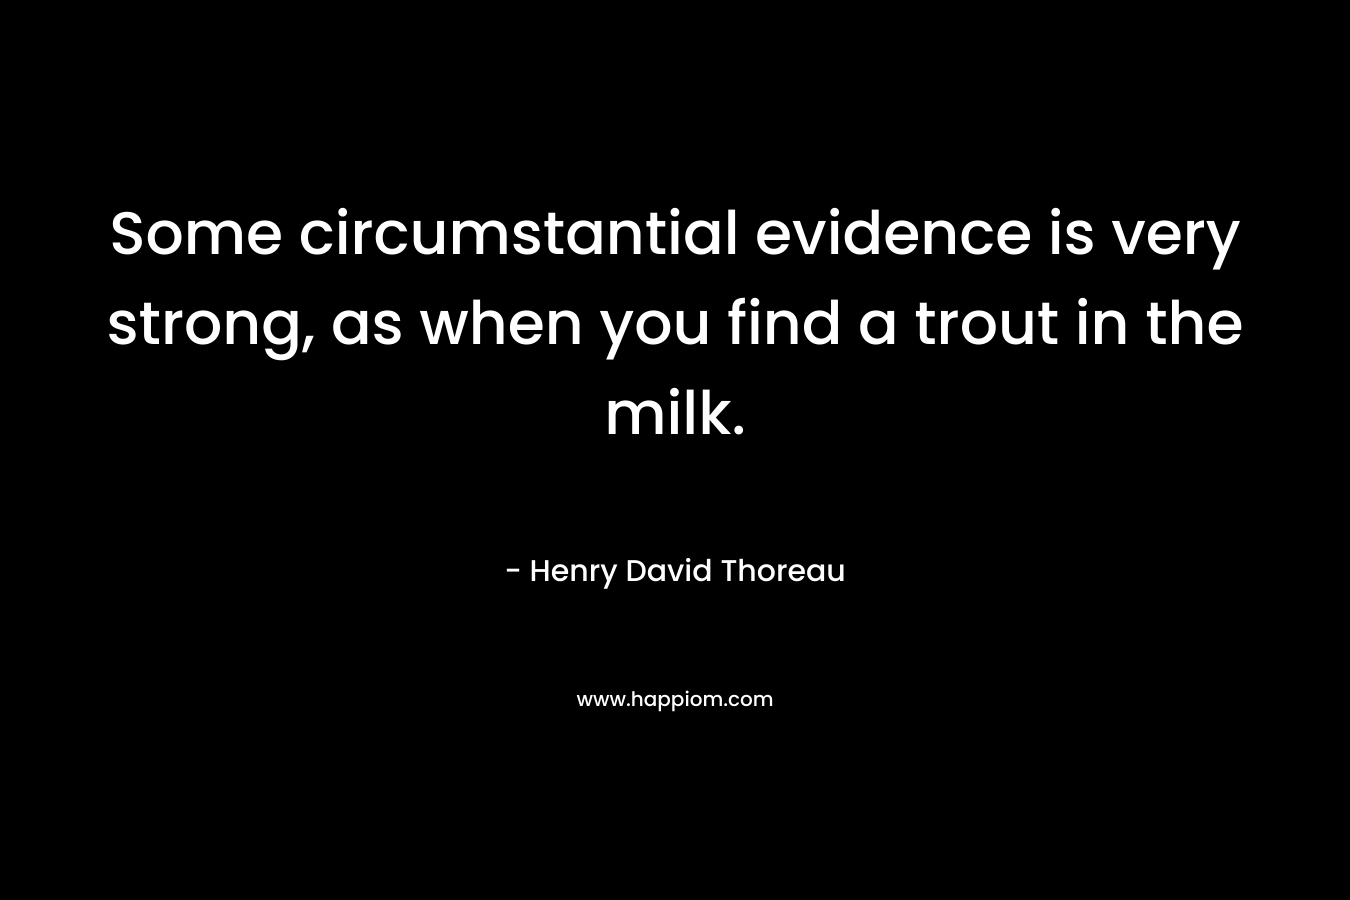 Some circumstantial evidence is very strong, as when you find a trout in the milk. – Henry David Thoreau